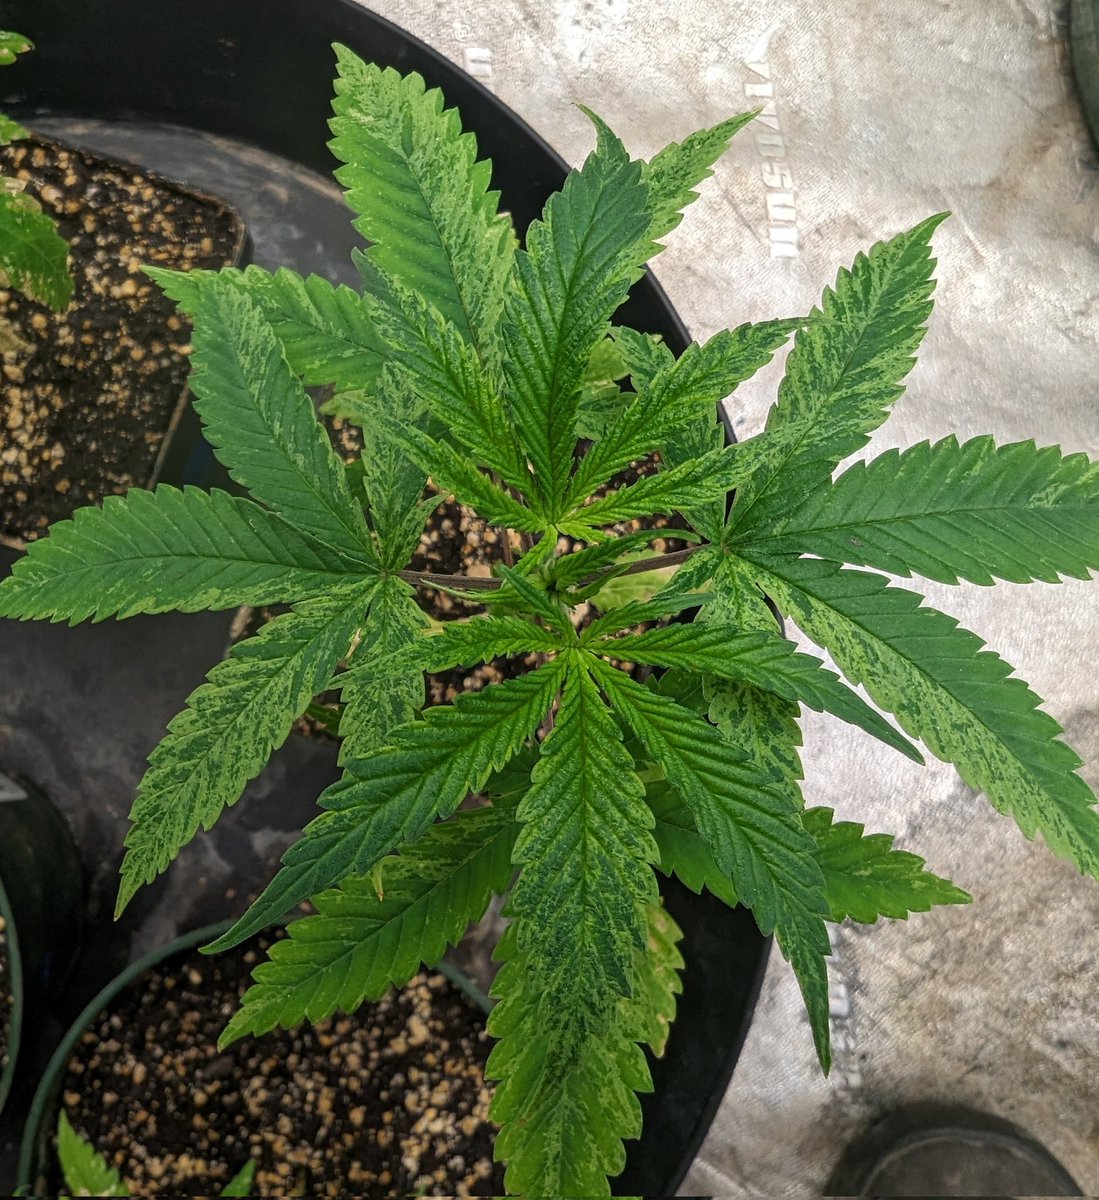 Got some variegation going on on one of the Oasis Fruit testers! One of the siblings is also displaying some, but not as much. Should know sex of the testers any day now!
#CannaLand #CannabisCommunity #Mmemberville
#CannabisCulture #420friendly #420community #ouid #homegrown